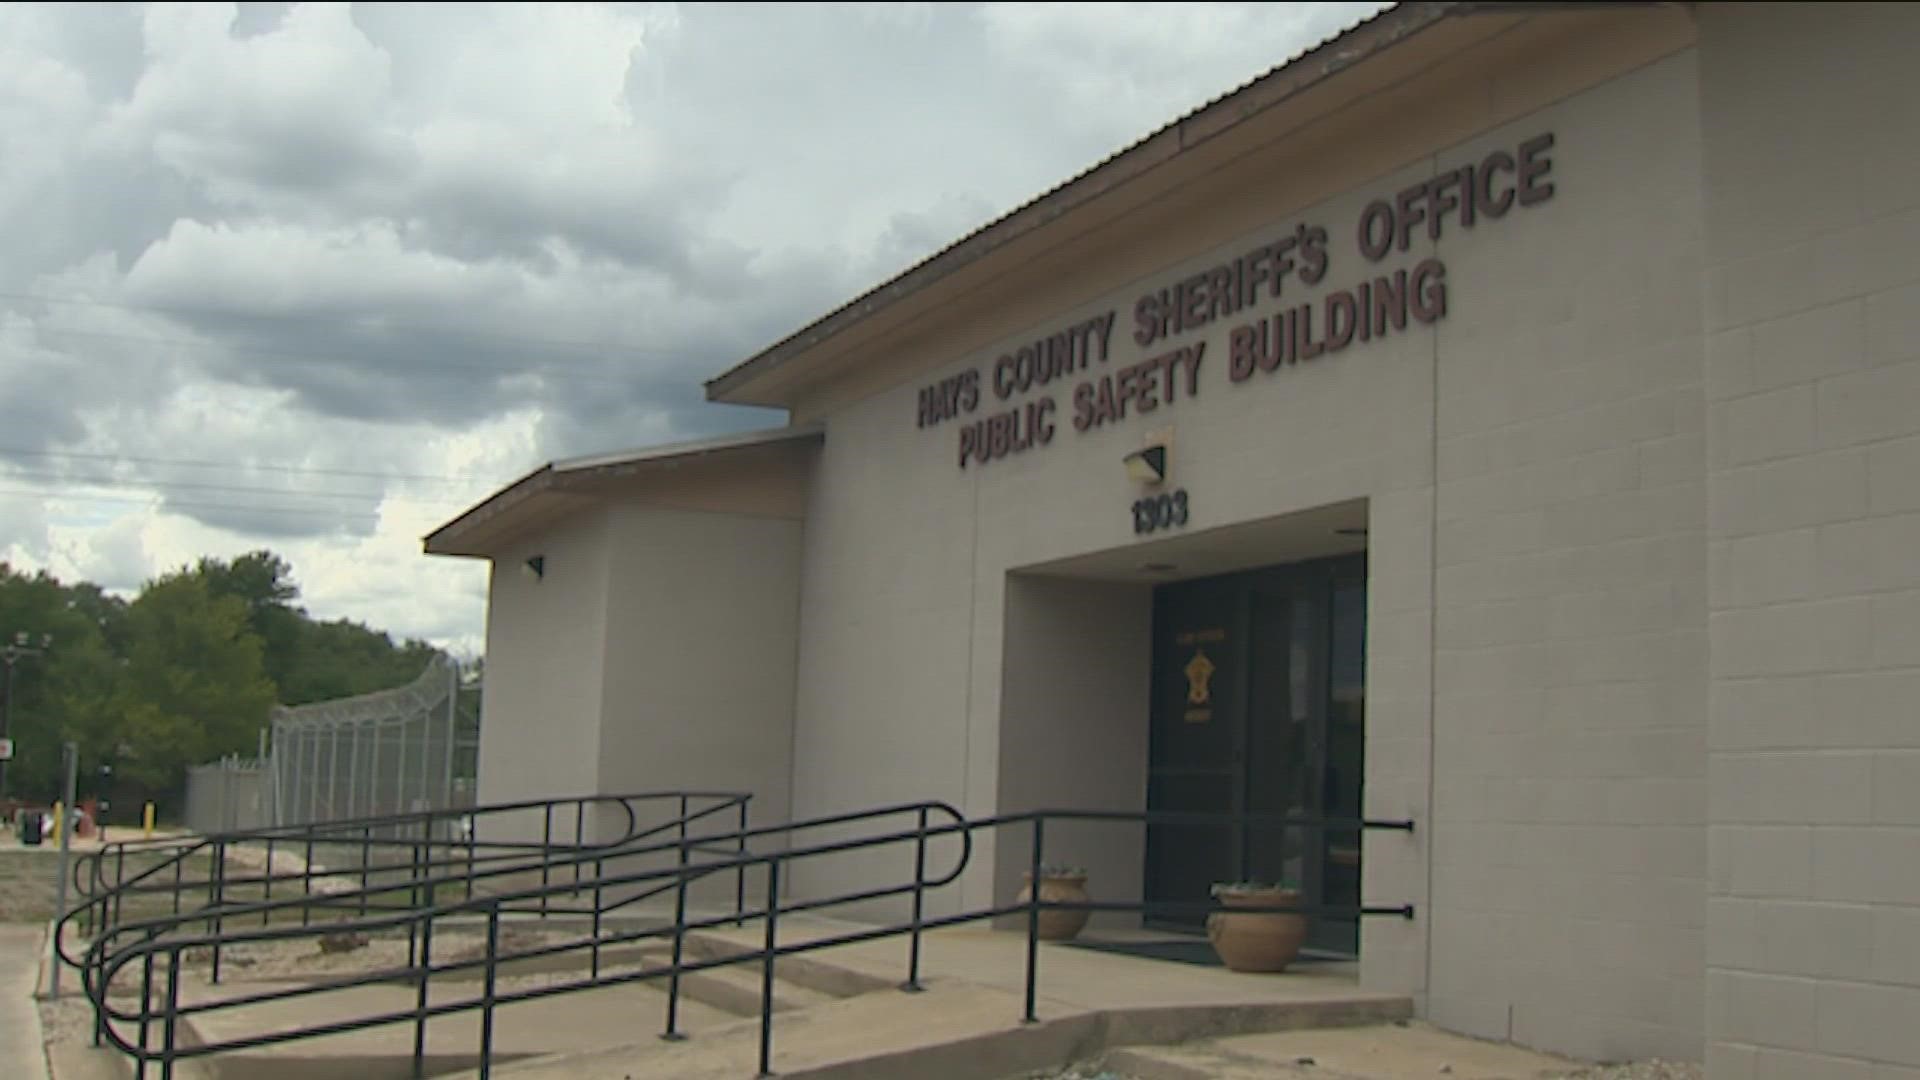 Officers are working overtime right now as officials struggle to fill vacancies.